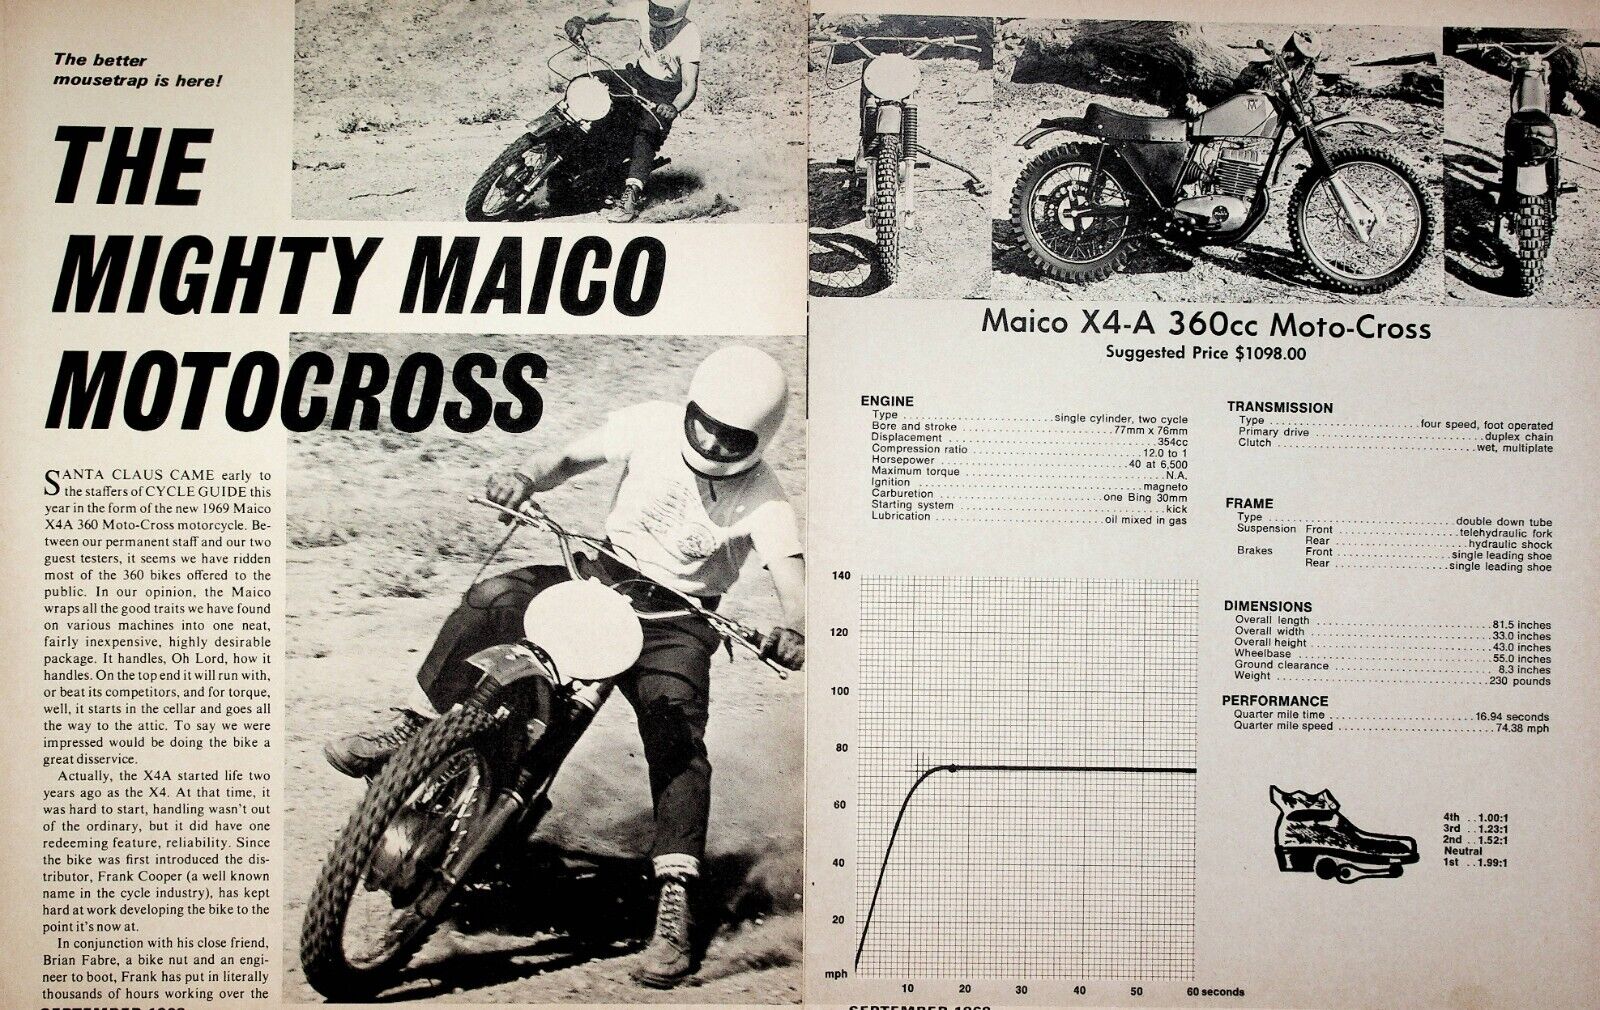 1968 Maico X4-A 360 Motocross Road Test - 5-Page Vintage Motorcycle Article